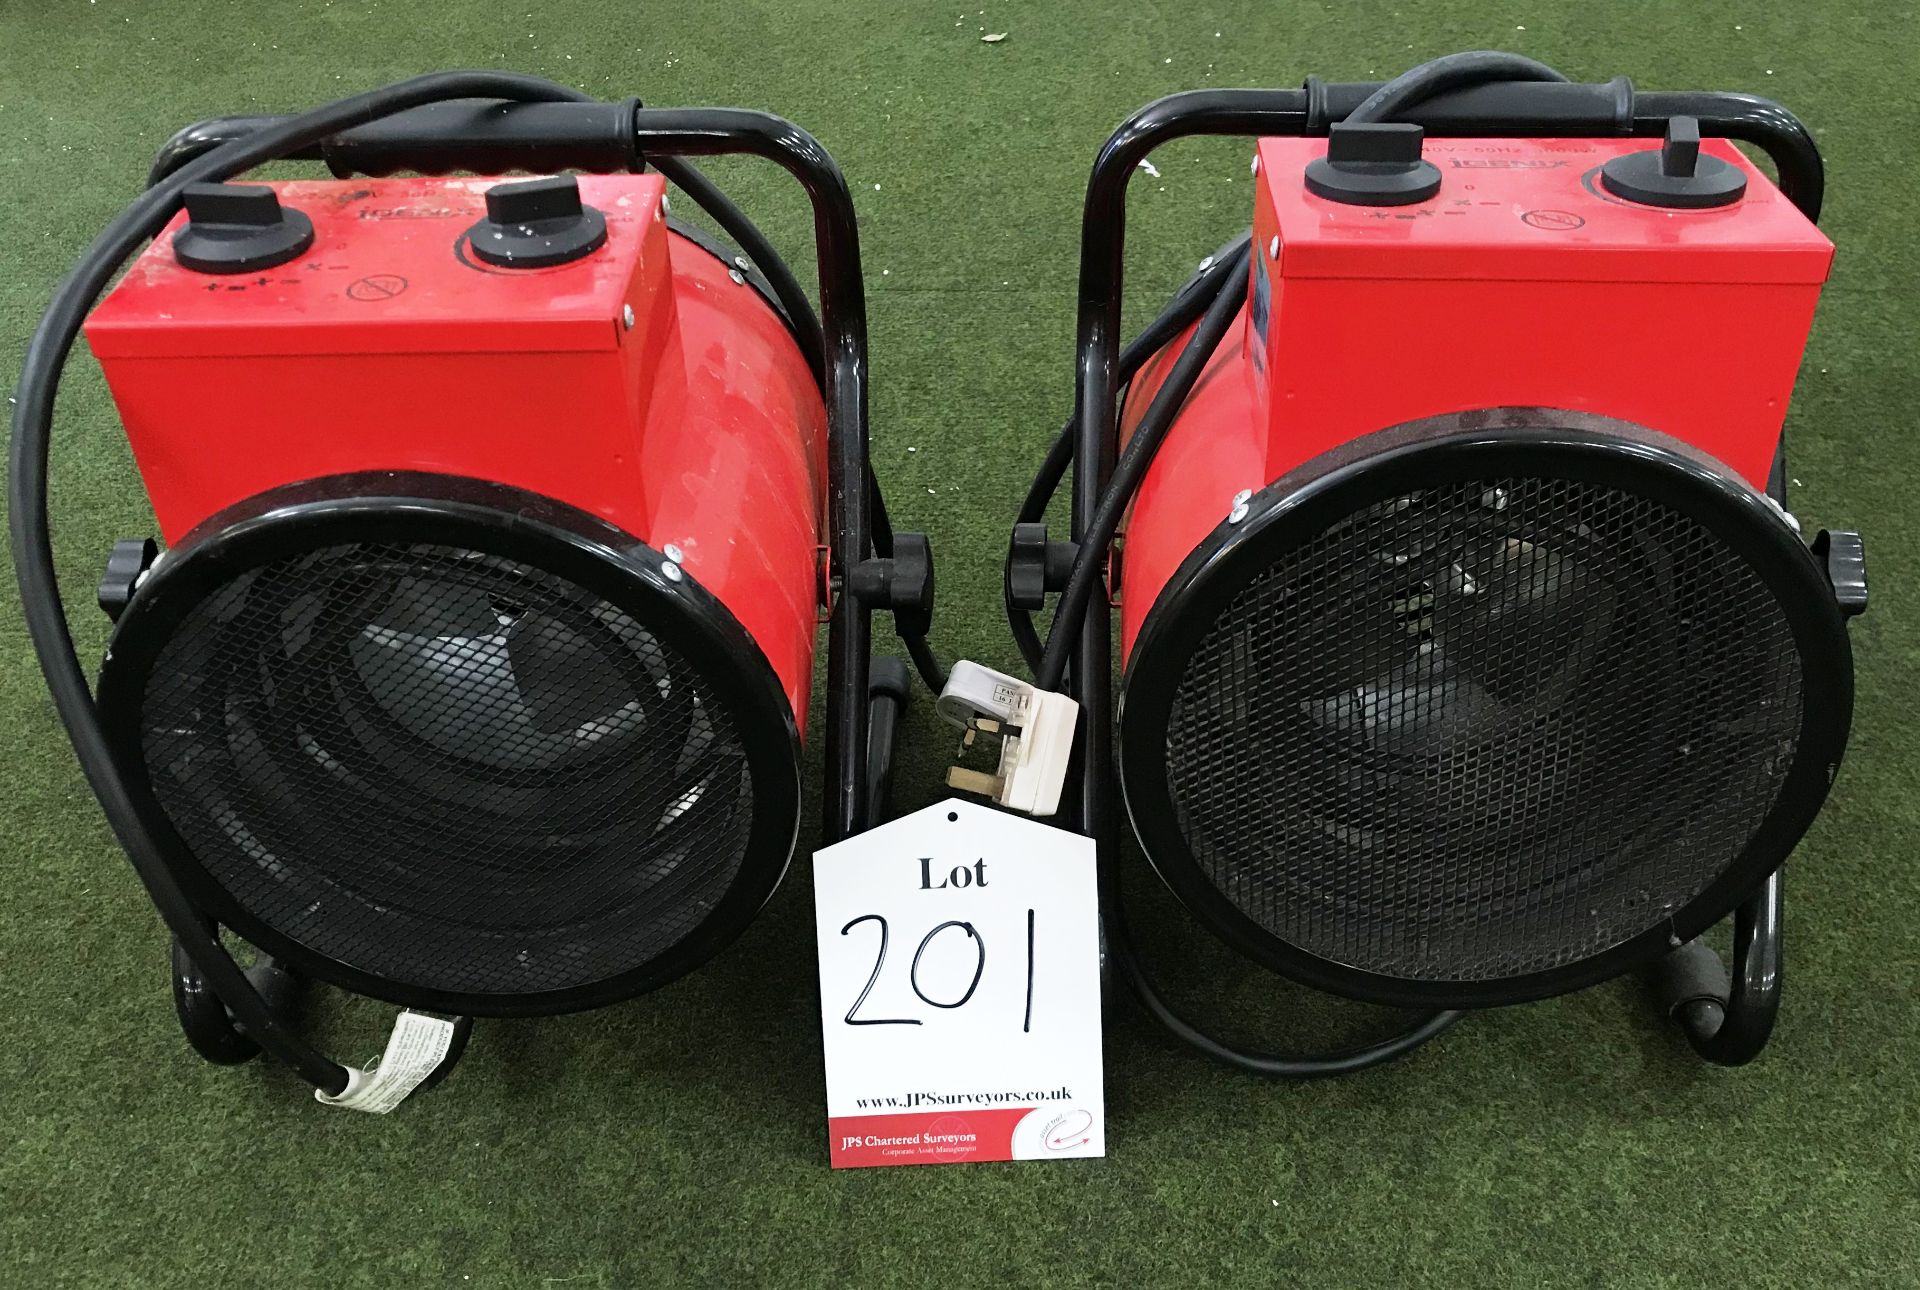 2 x Used Igenix IG9300 Commercial Drum Heater - Black/Red - RRP£79